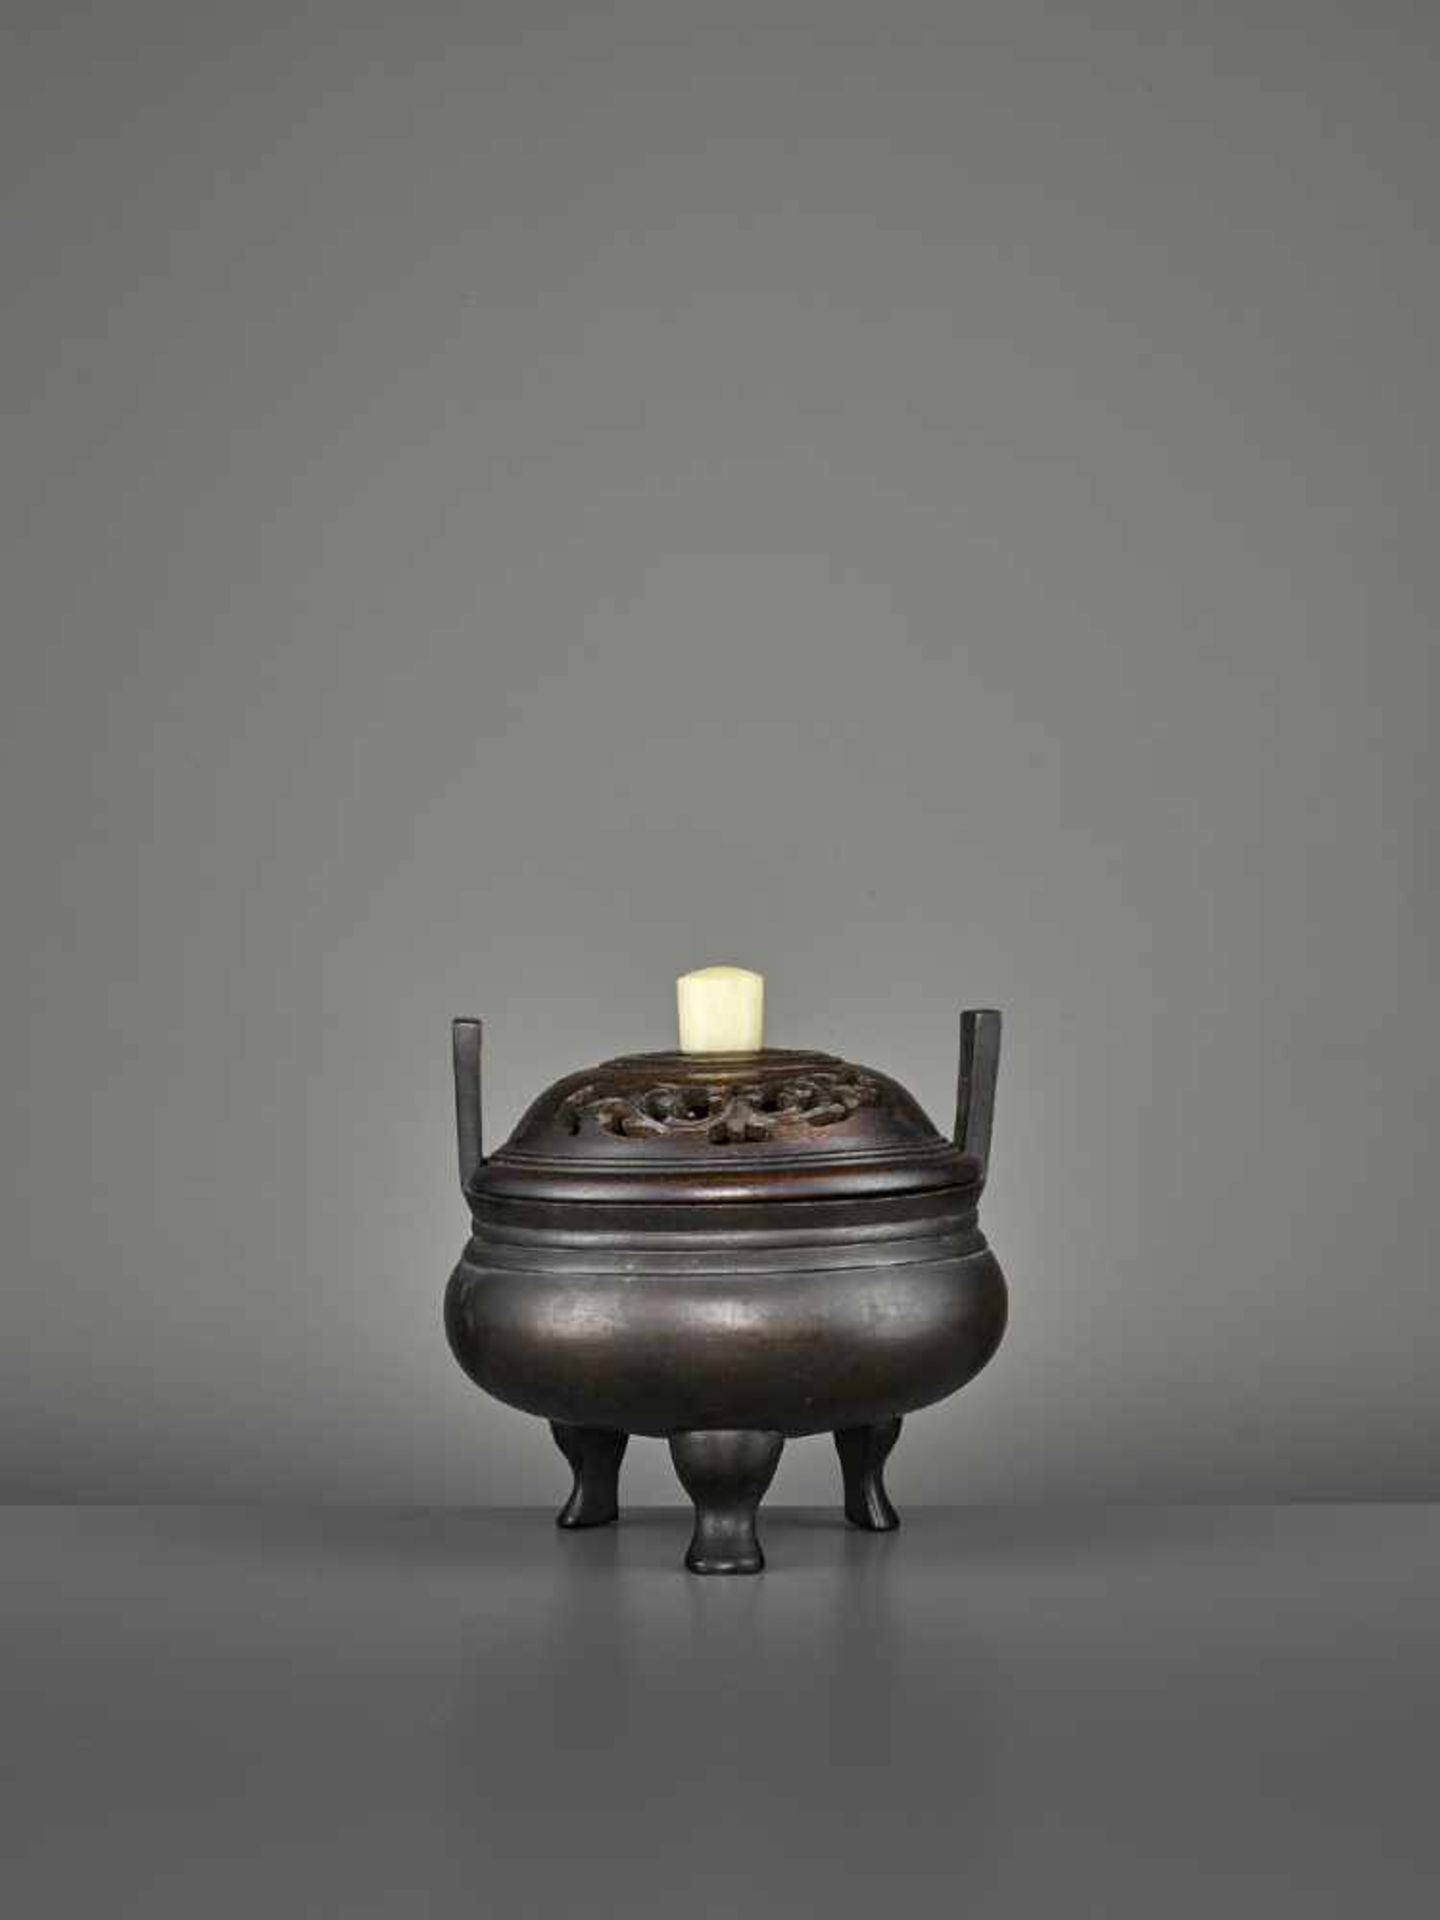 A BRONZE TRIPOD CENSER, MING China, 17th century. The incense burner standing on three feet, with